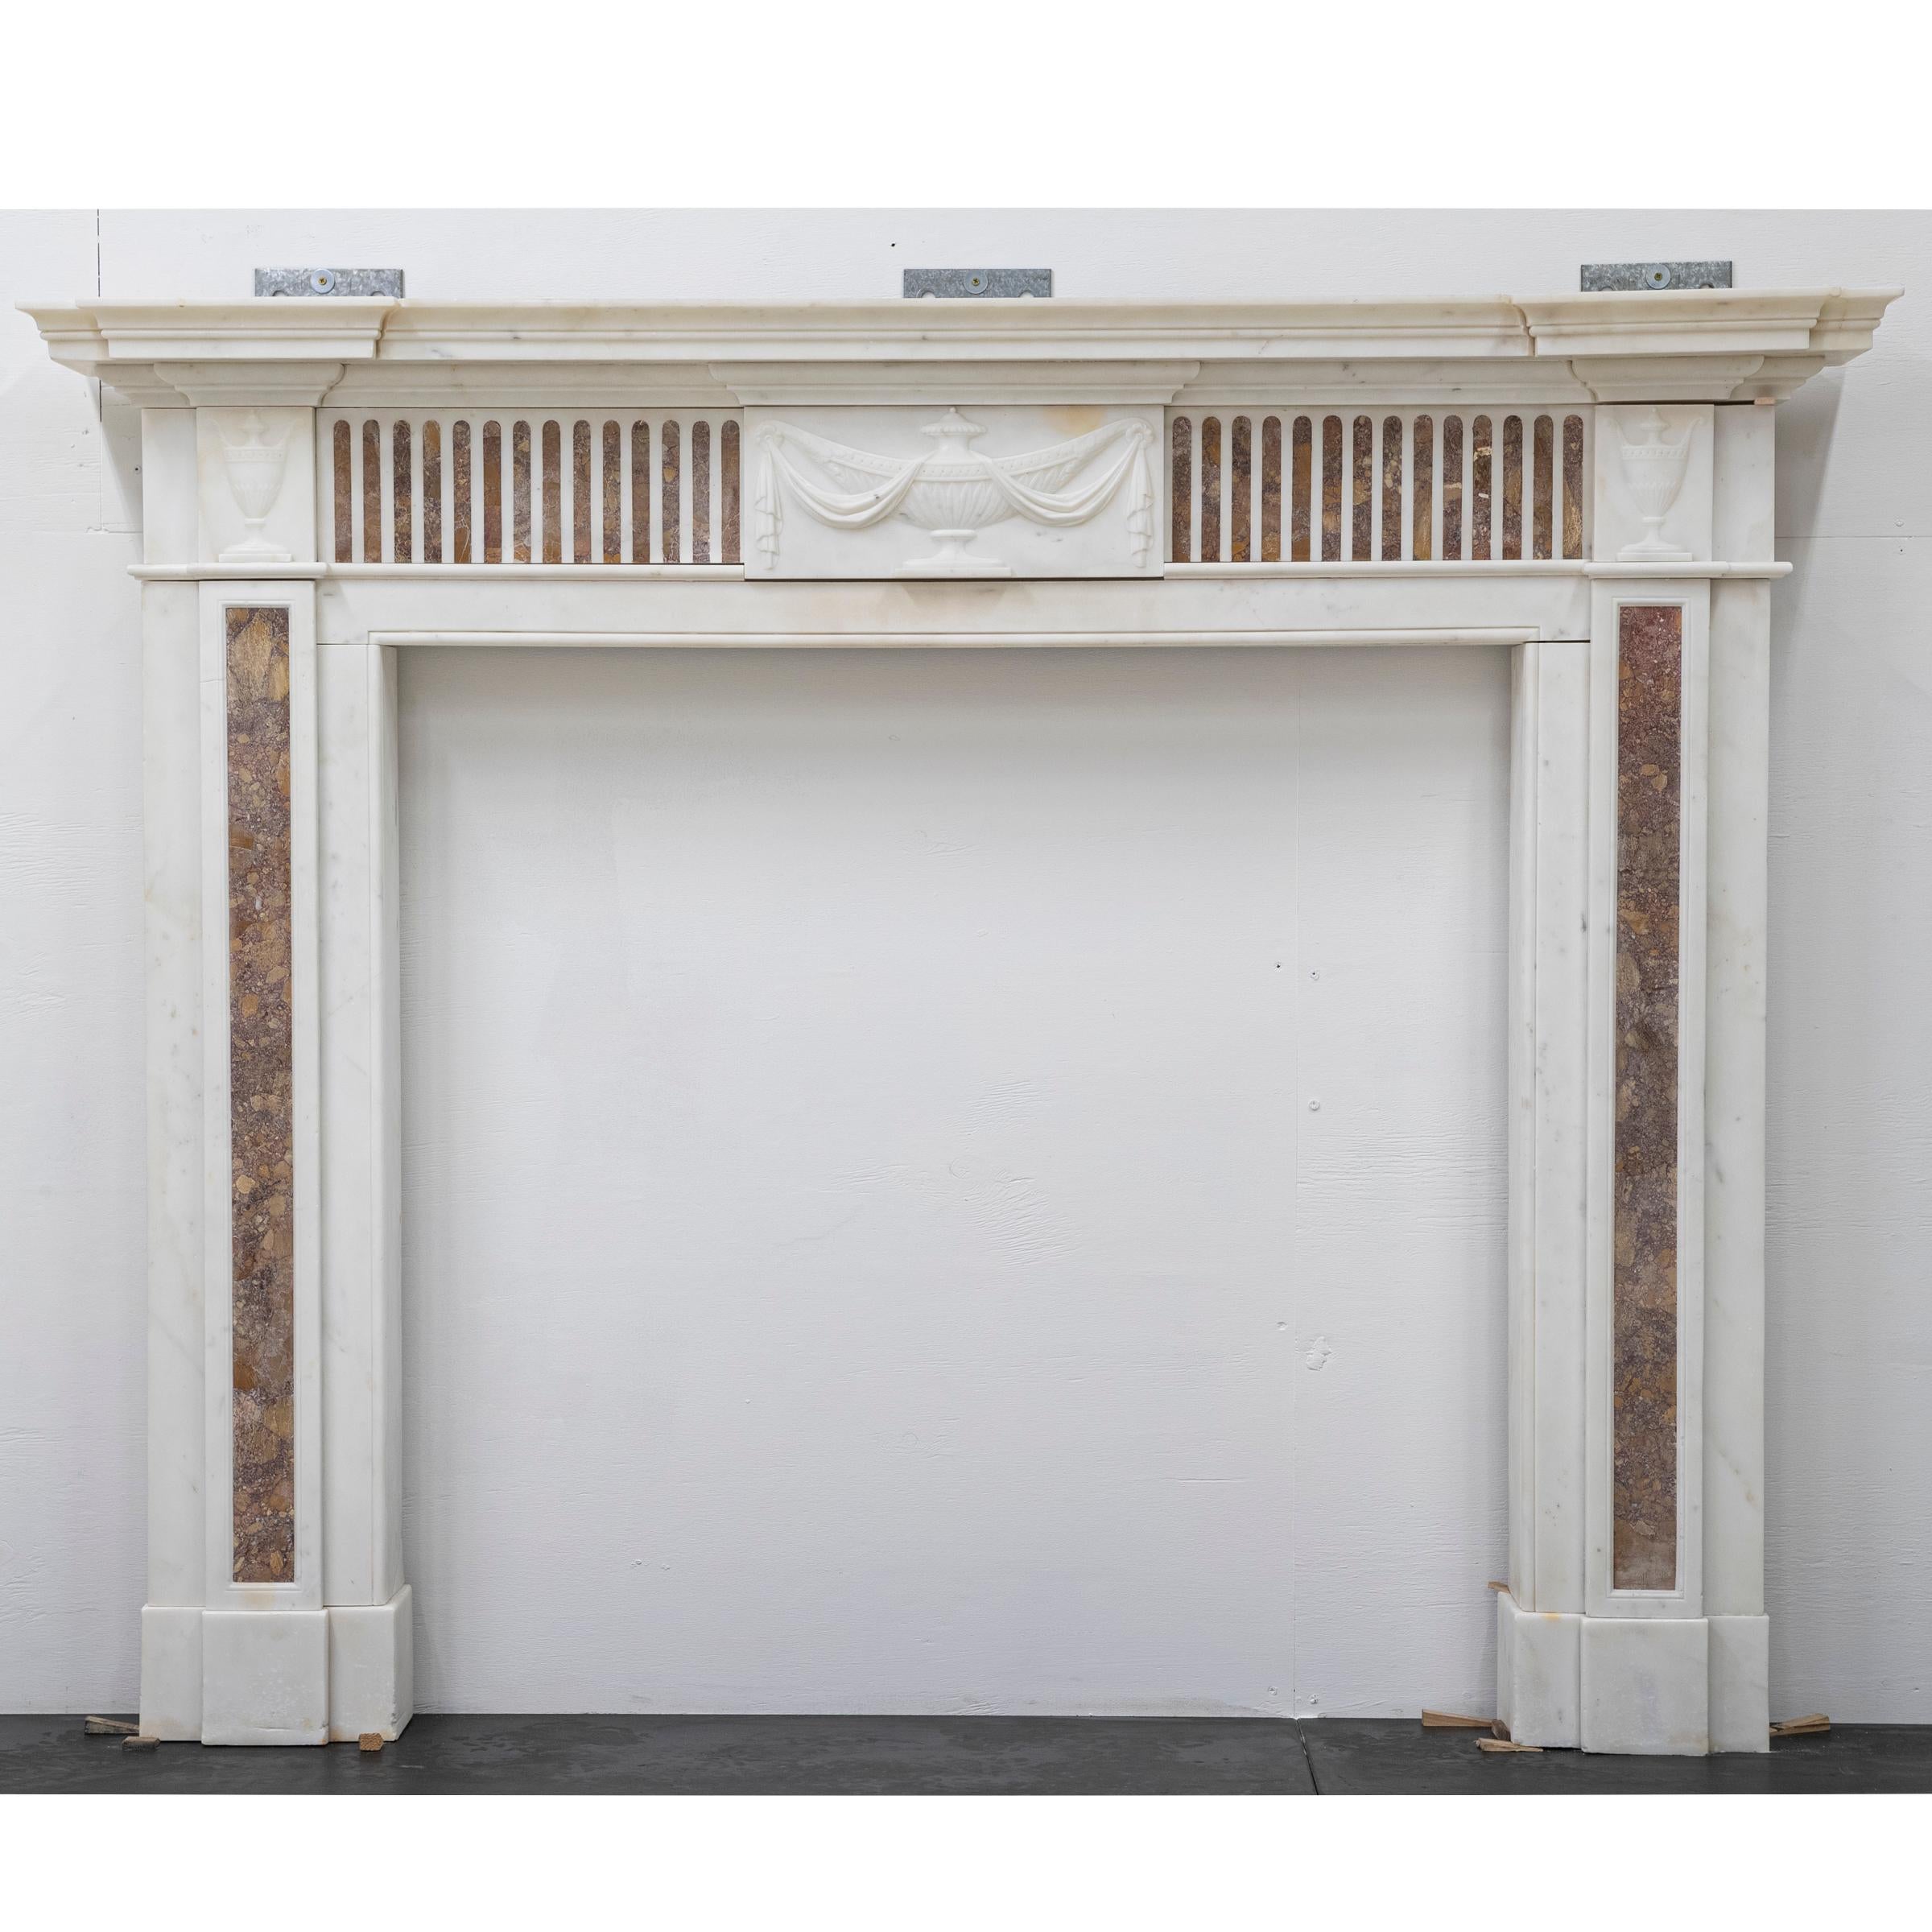 A fine, late Georgian chimneypiece in Statuary marble with Spanish Brocatelle marble fluting and ingrounds.

The breakfront shelf rests above an opulent frieze that is decorated with thumbnail Brocatelle marble. The frieze is flanked by end blocks